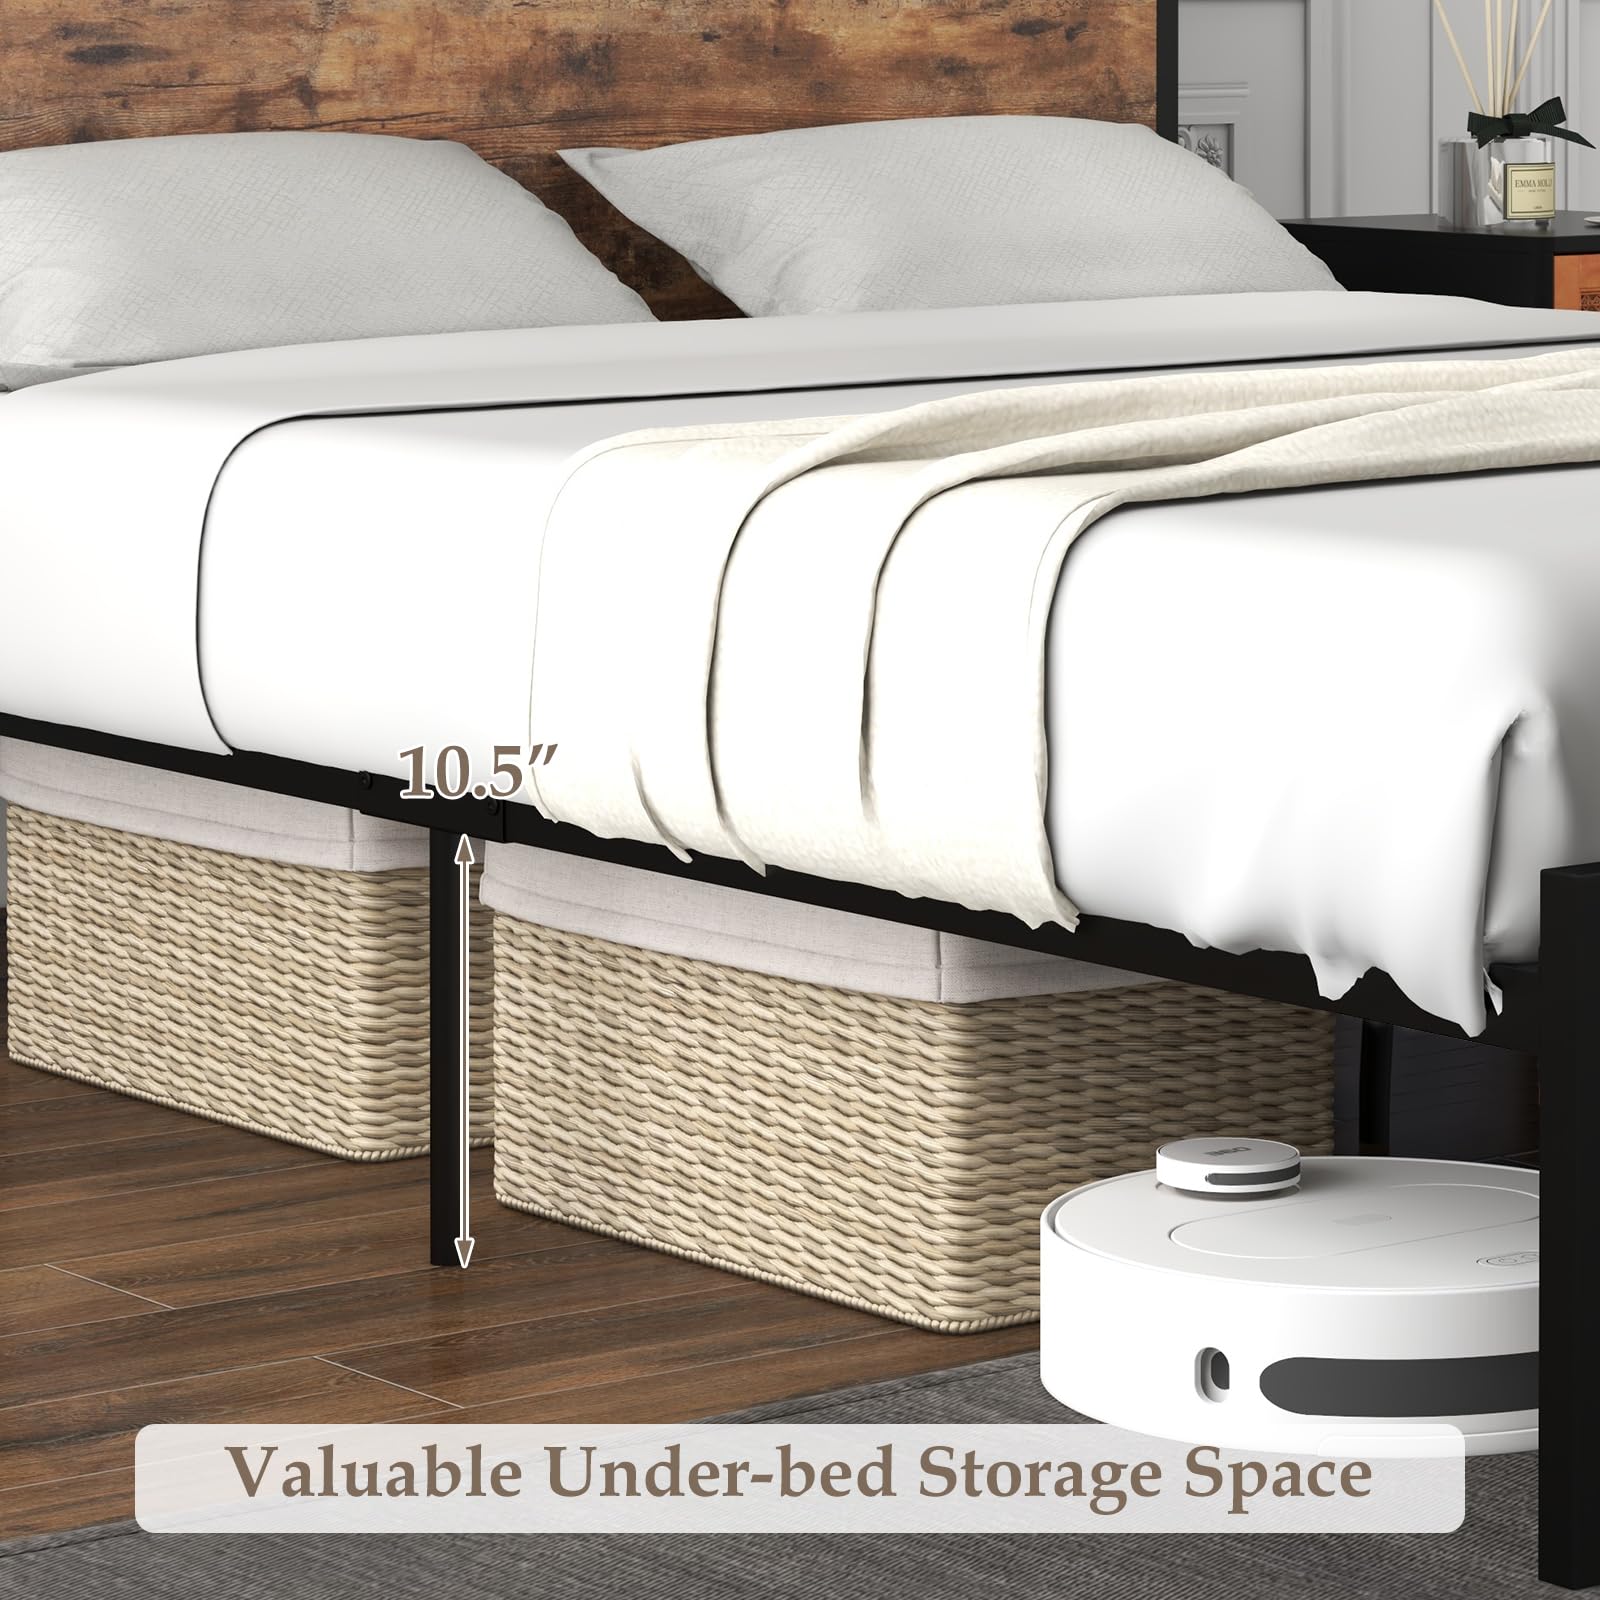 Giantex Full Bed Frame with Storage Headboard and Charging Station, with Outlets and USB Ports